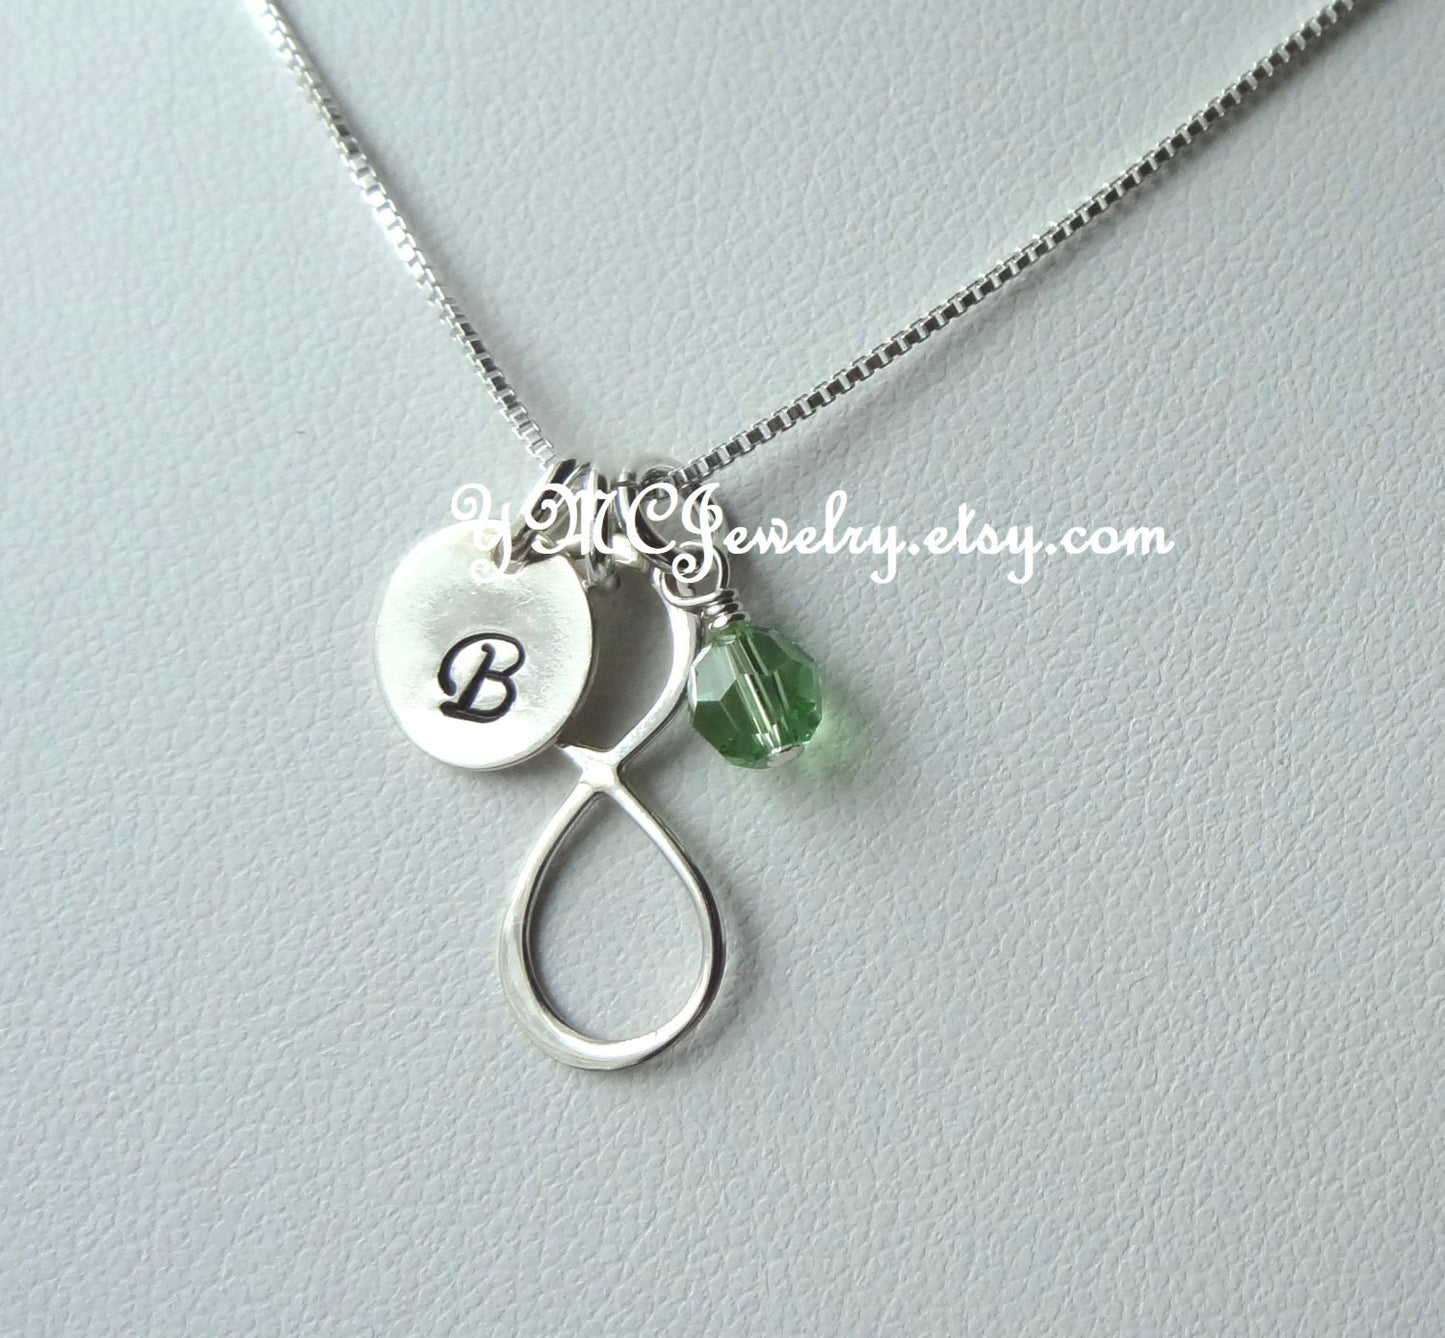 Sterling Silver Infinity Initial Birthstone Necklace, Infinity Necklace, Birthstone Necklace, Bridesmaid Necklace, Mother Necklace